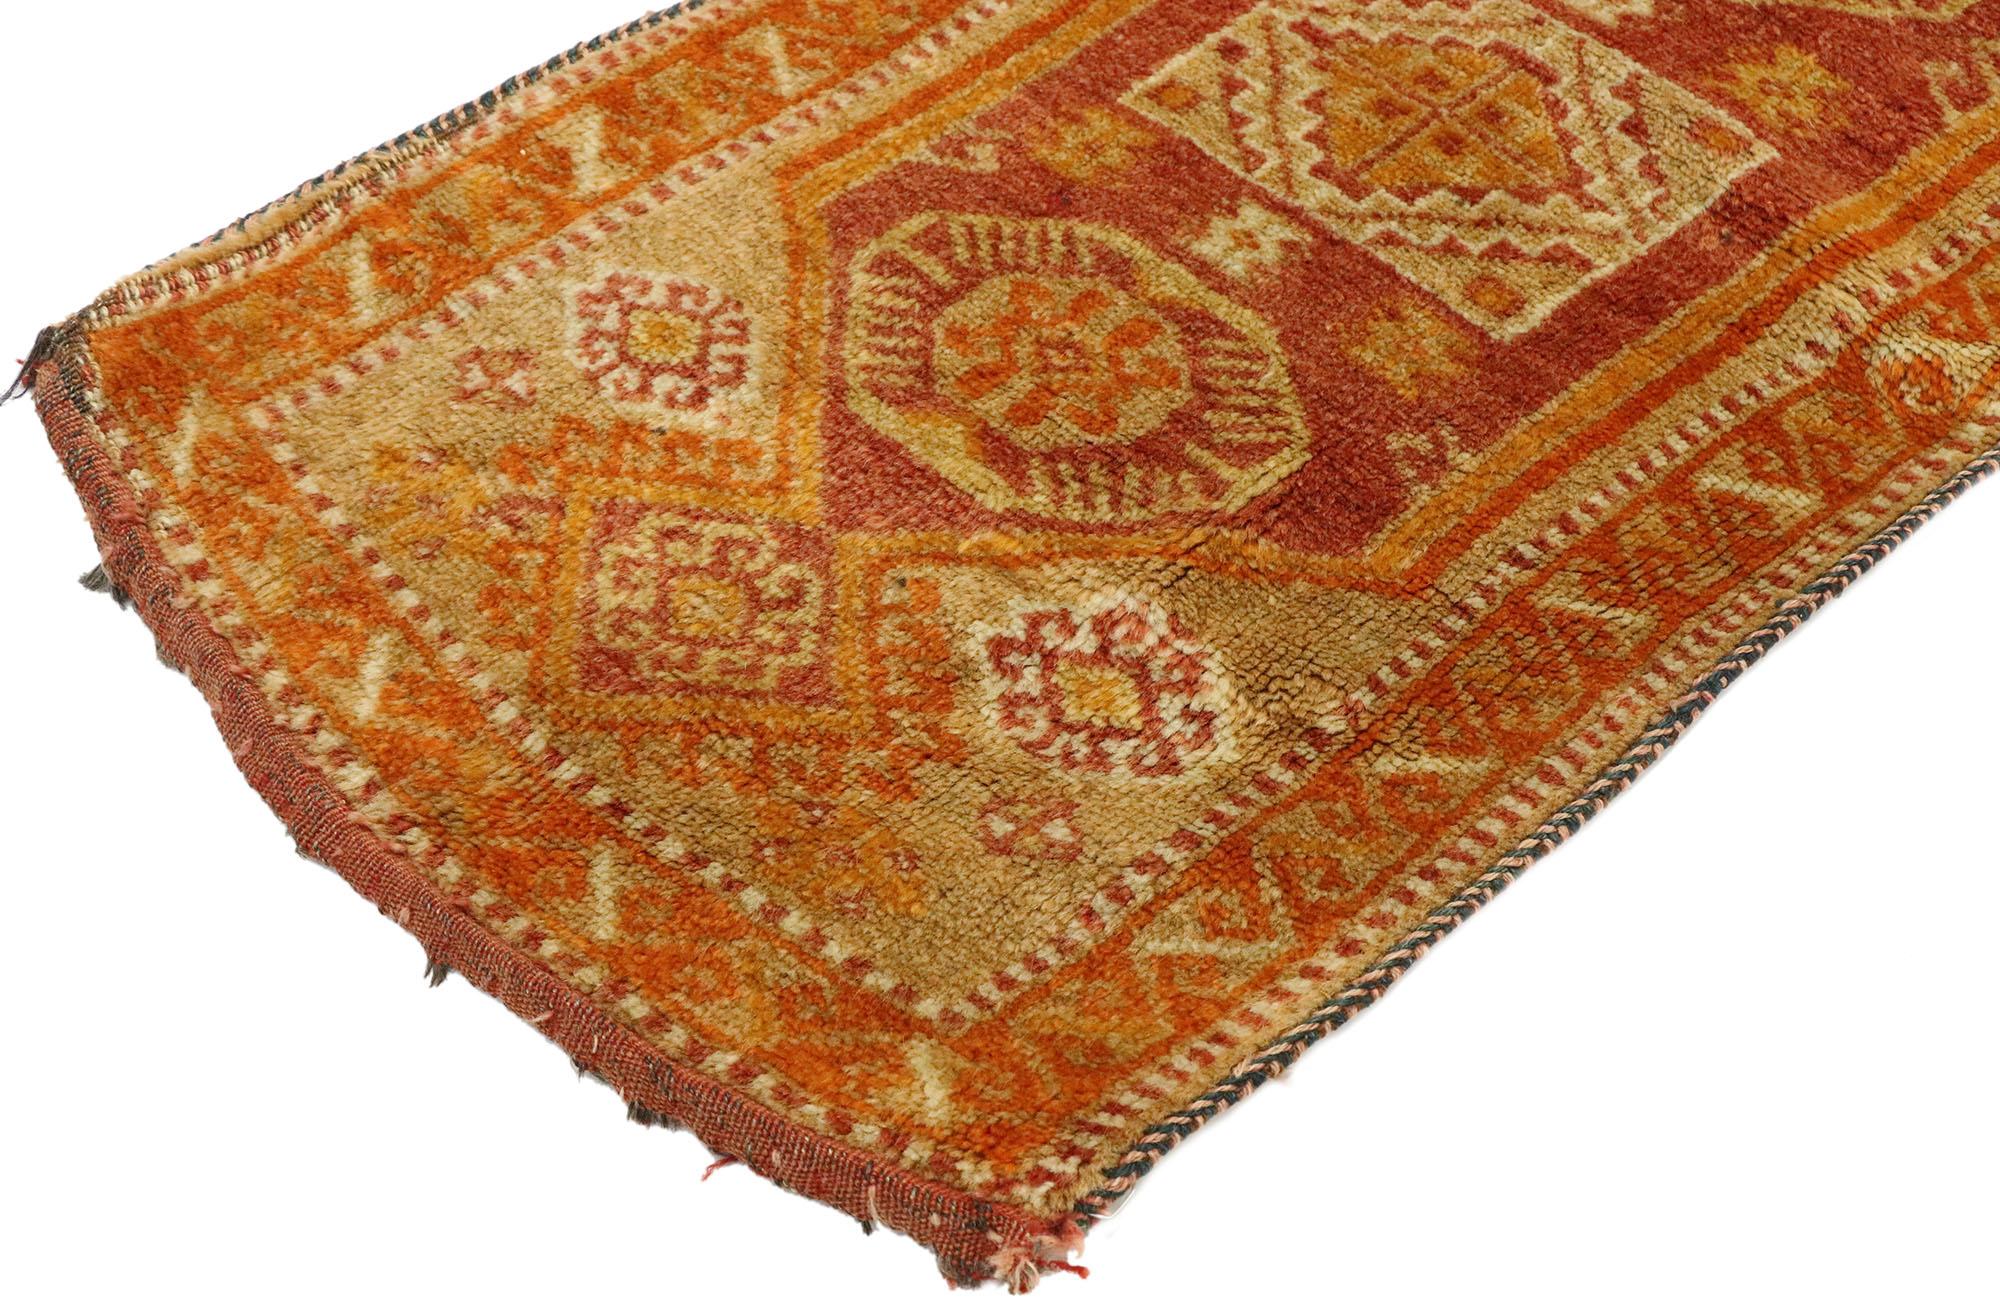 53111, vintage Turkish Oushak Saddlebag Throw with Modern Northwestern style. Tribal charm with rustic sensibility, this vintage Turkish saddlebag throw rug beautifully showcases a modern northwestern style. The composition is divided into two